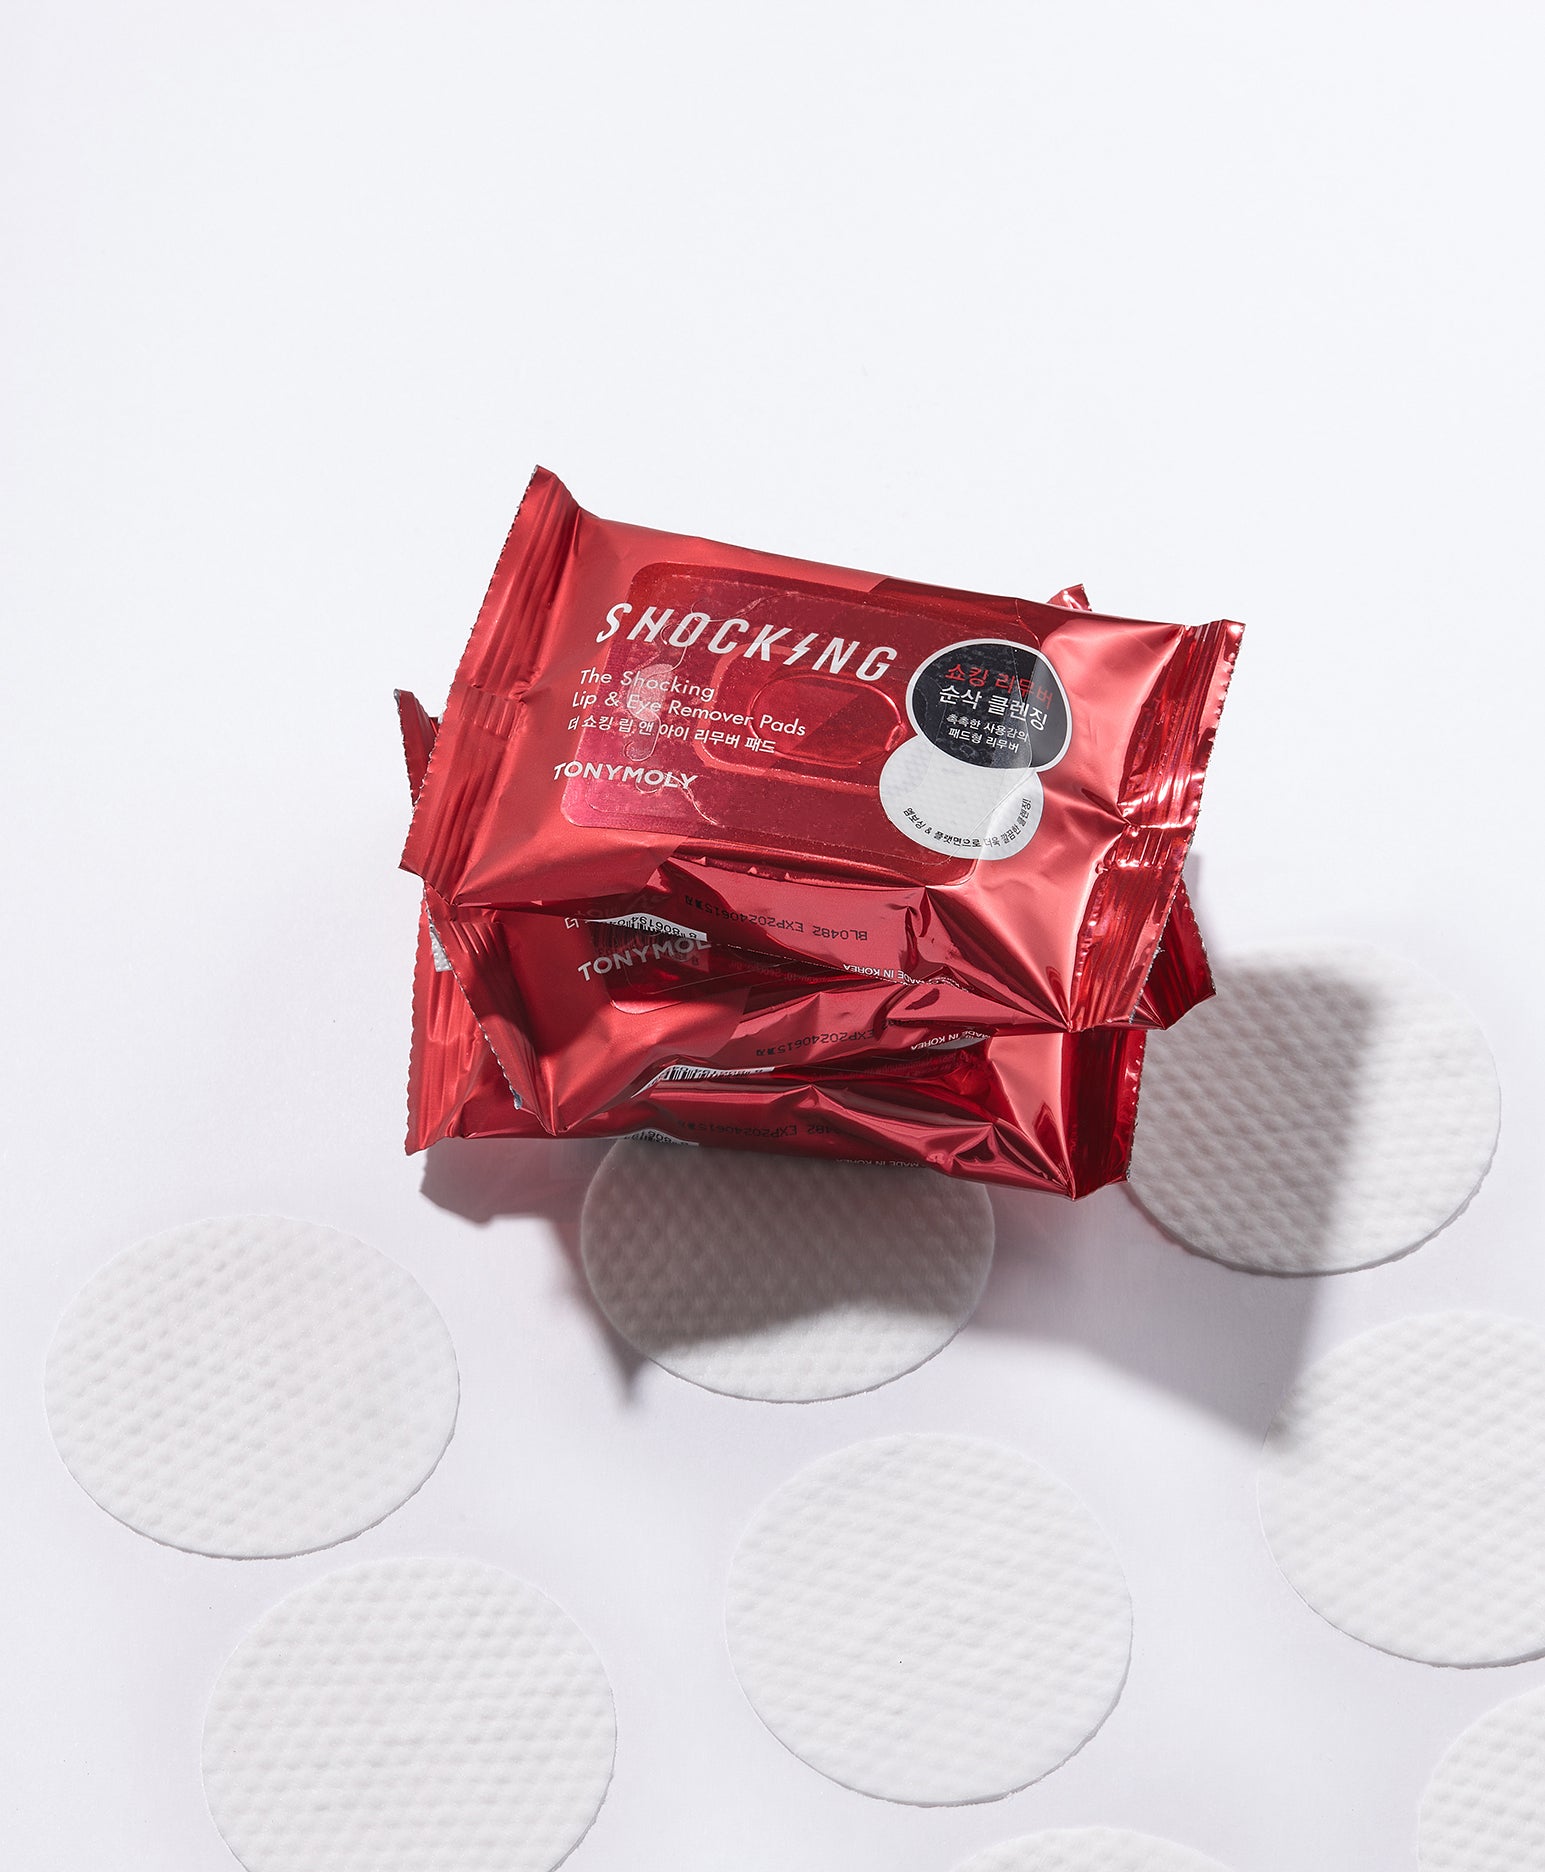 The Shocking Lip & Eye Remover Pads 30 sheets